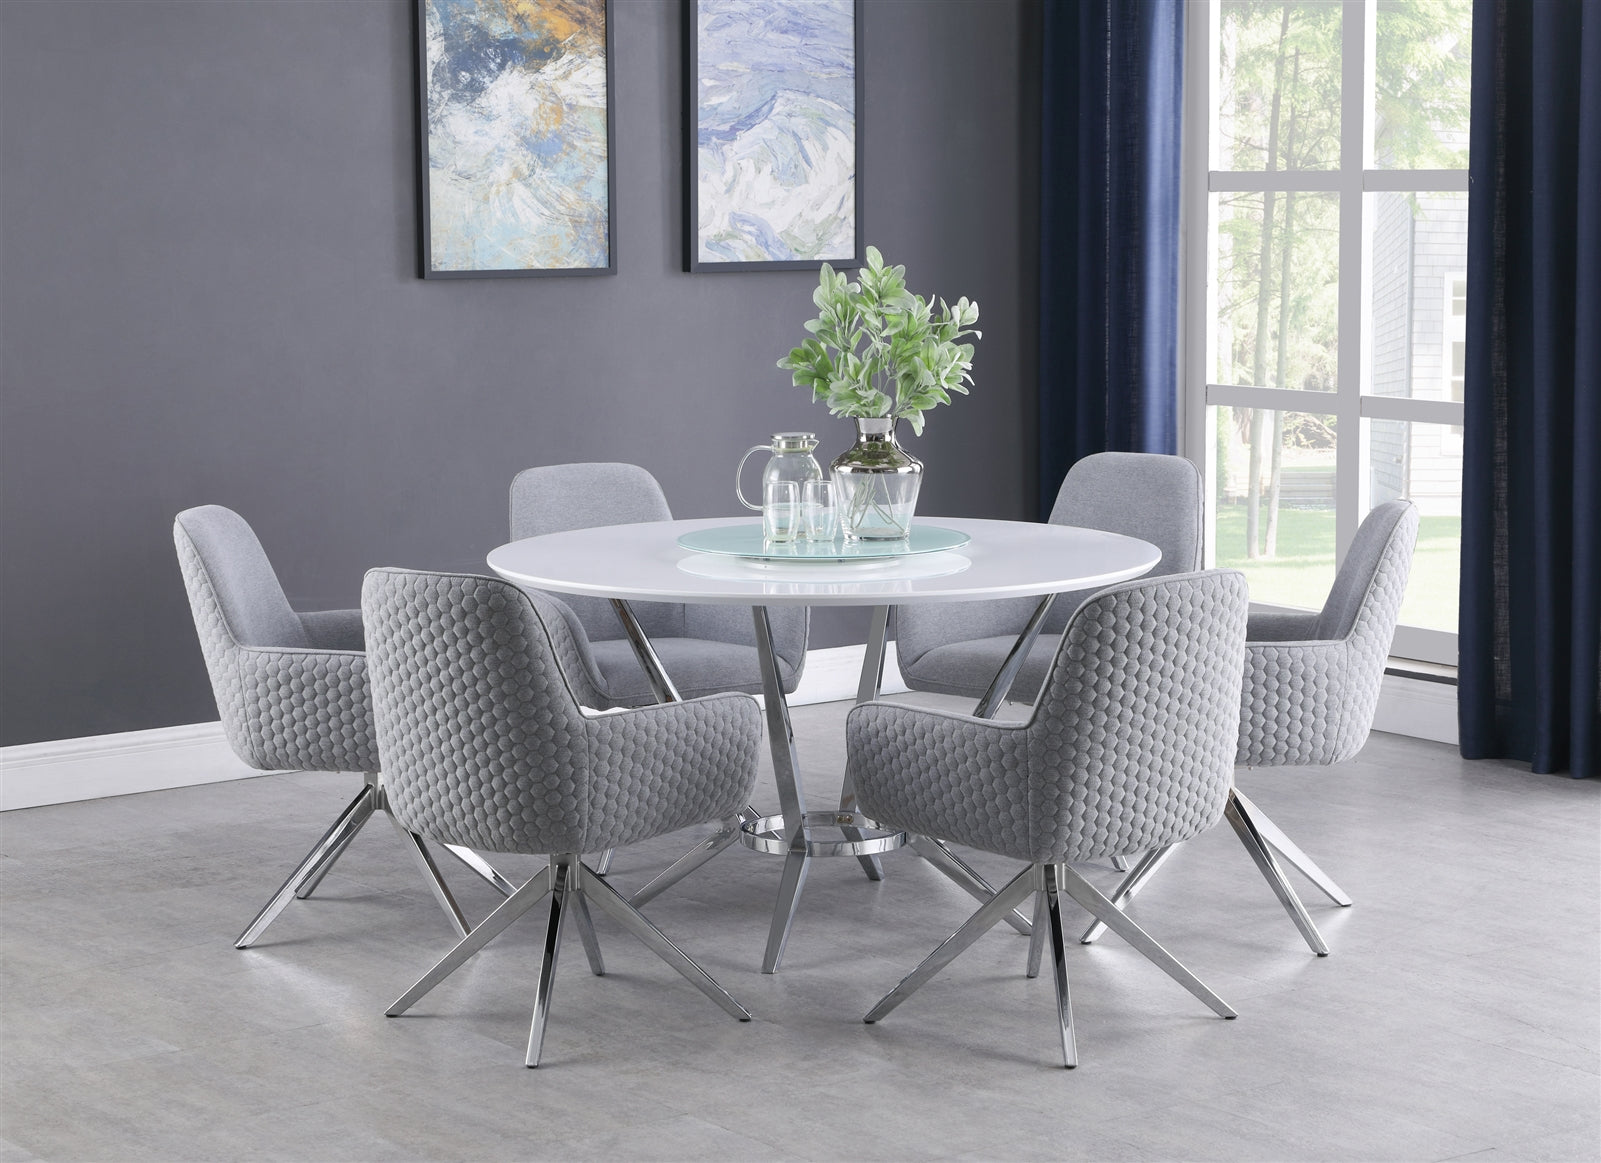 Abby Contemporary 5 Piece Dining Set w- Swivel Chairs & Lazy Susan